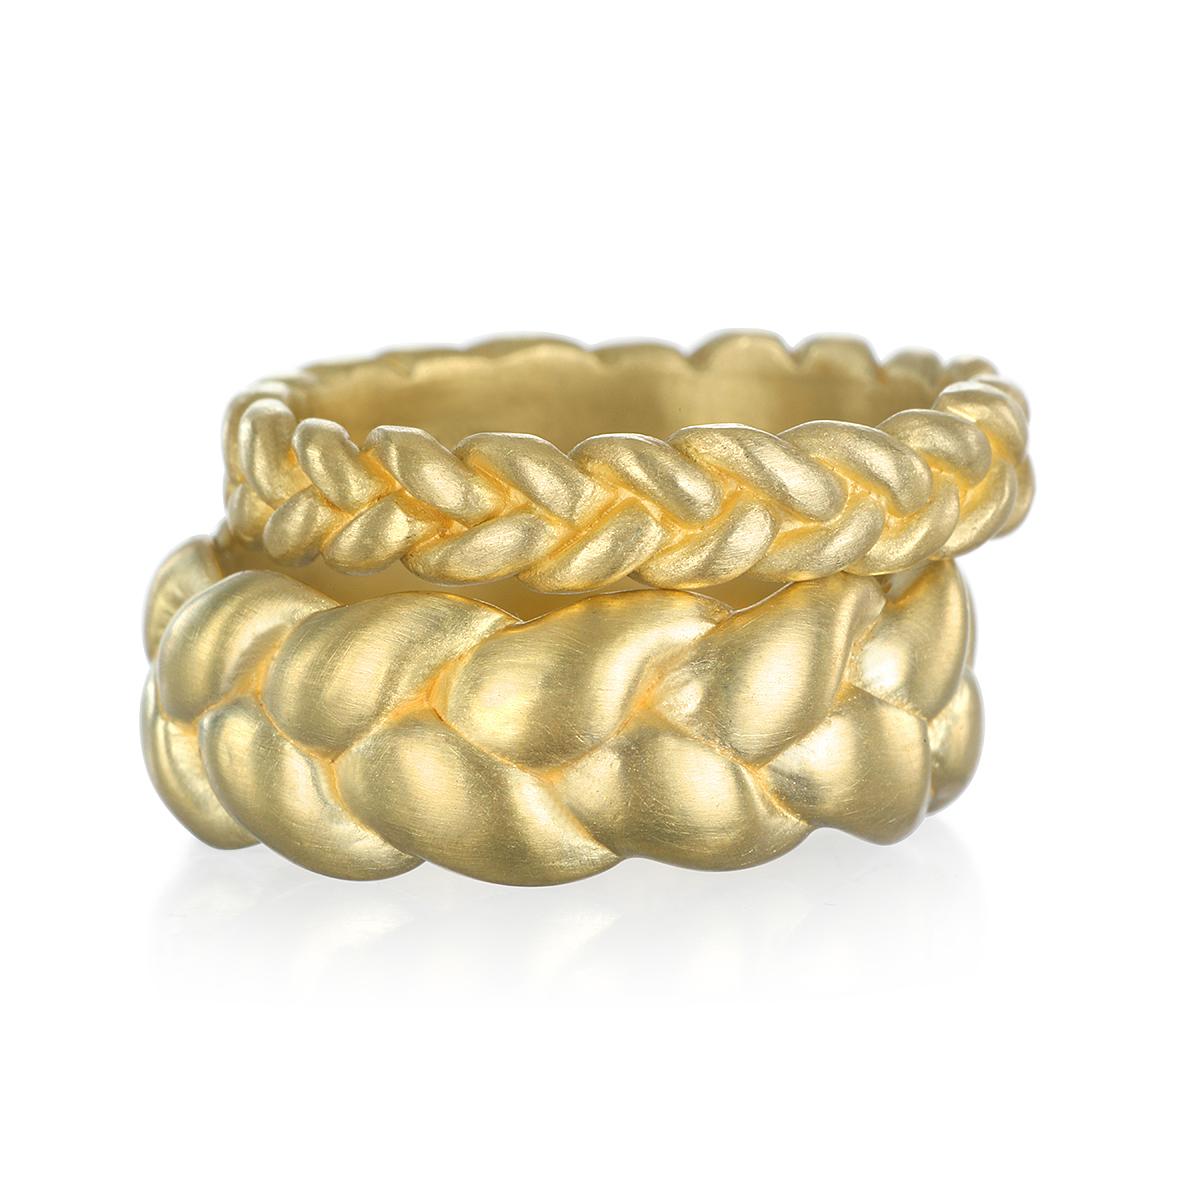 18K Gold Braided Ring
Individually or together, this set of handmade rings is the look that it is stacked up to be! Classic beauty, understated confidence, and pure style.

WB55  Chunky 5/16 inch wide - $2,700
WB75 Thin 3/16 inch wide - $1,490

This